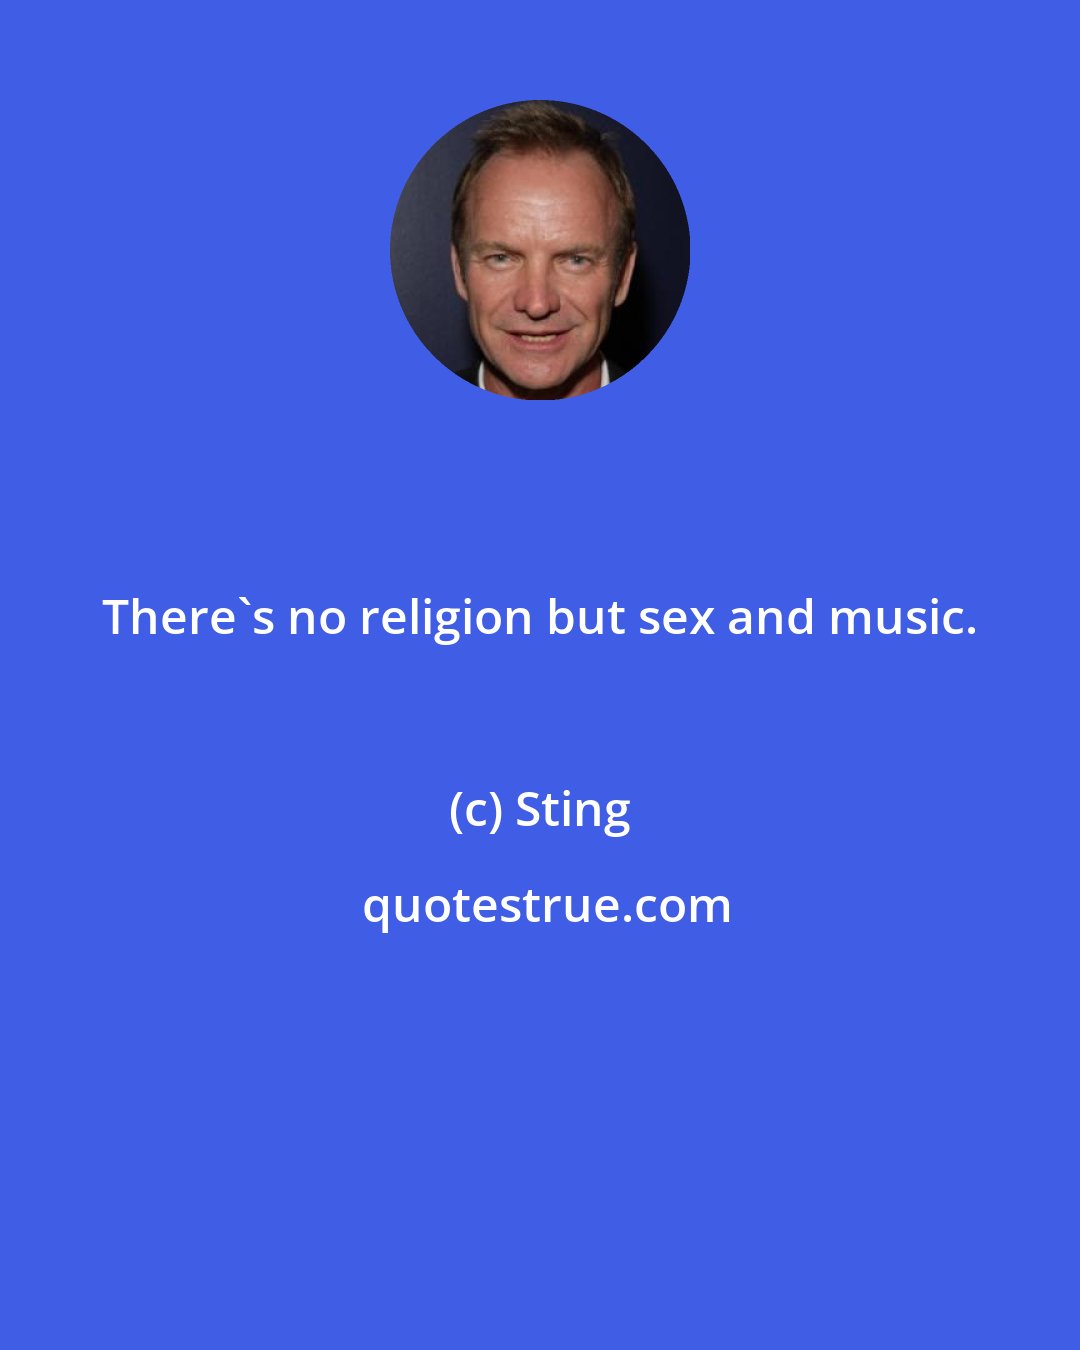 Sting: There's no religion but sex and music.